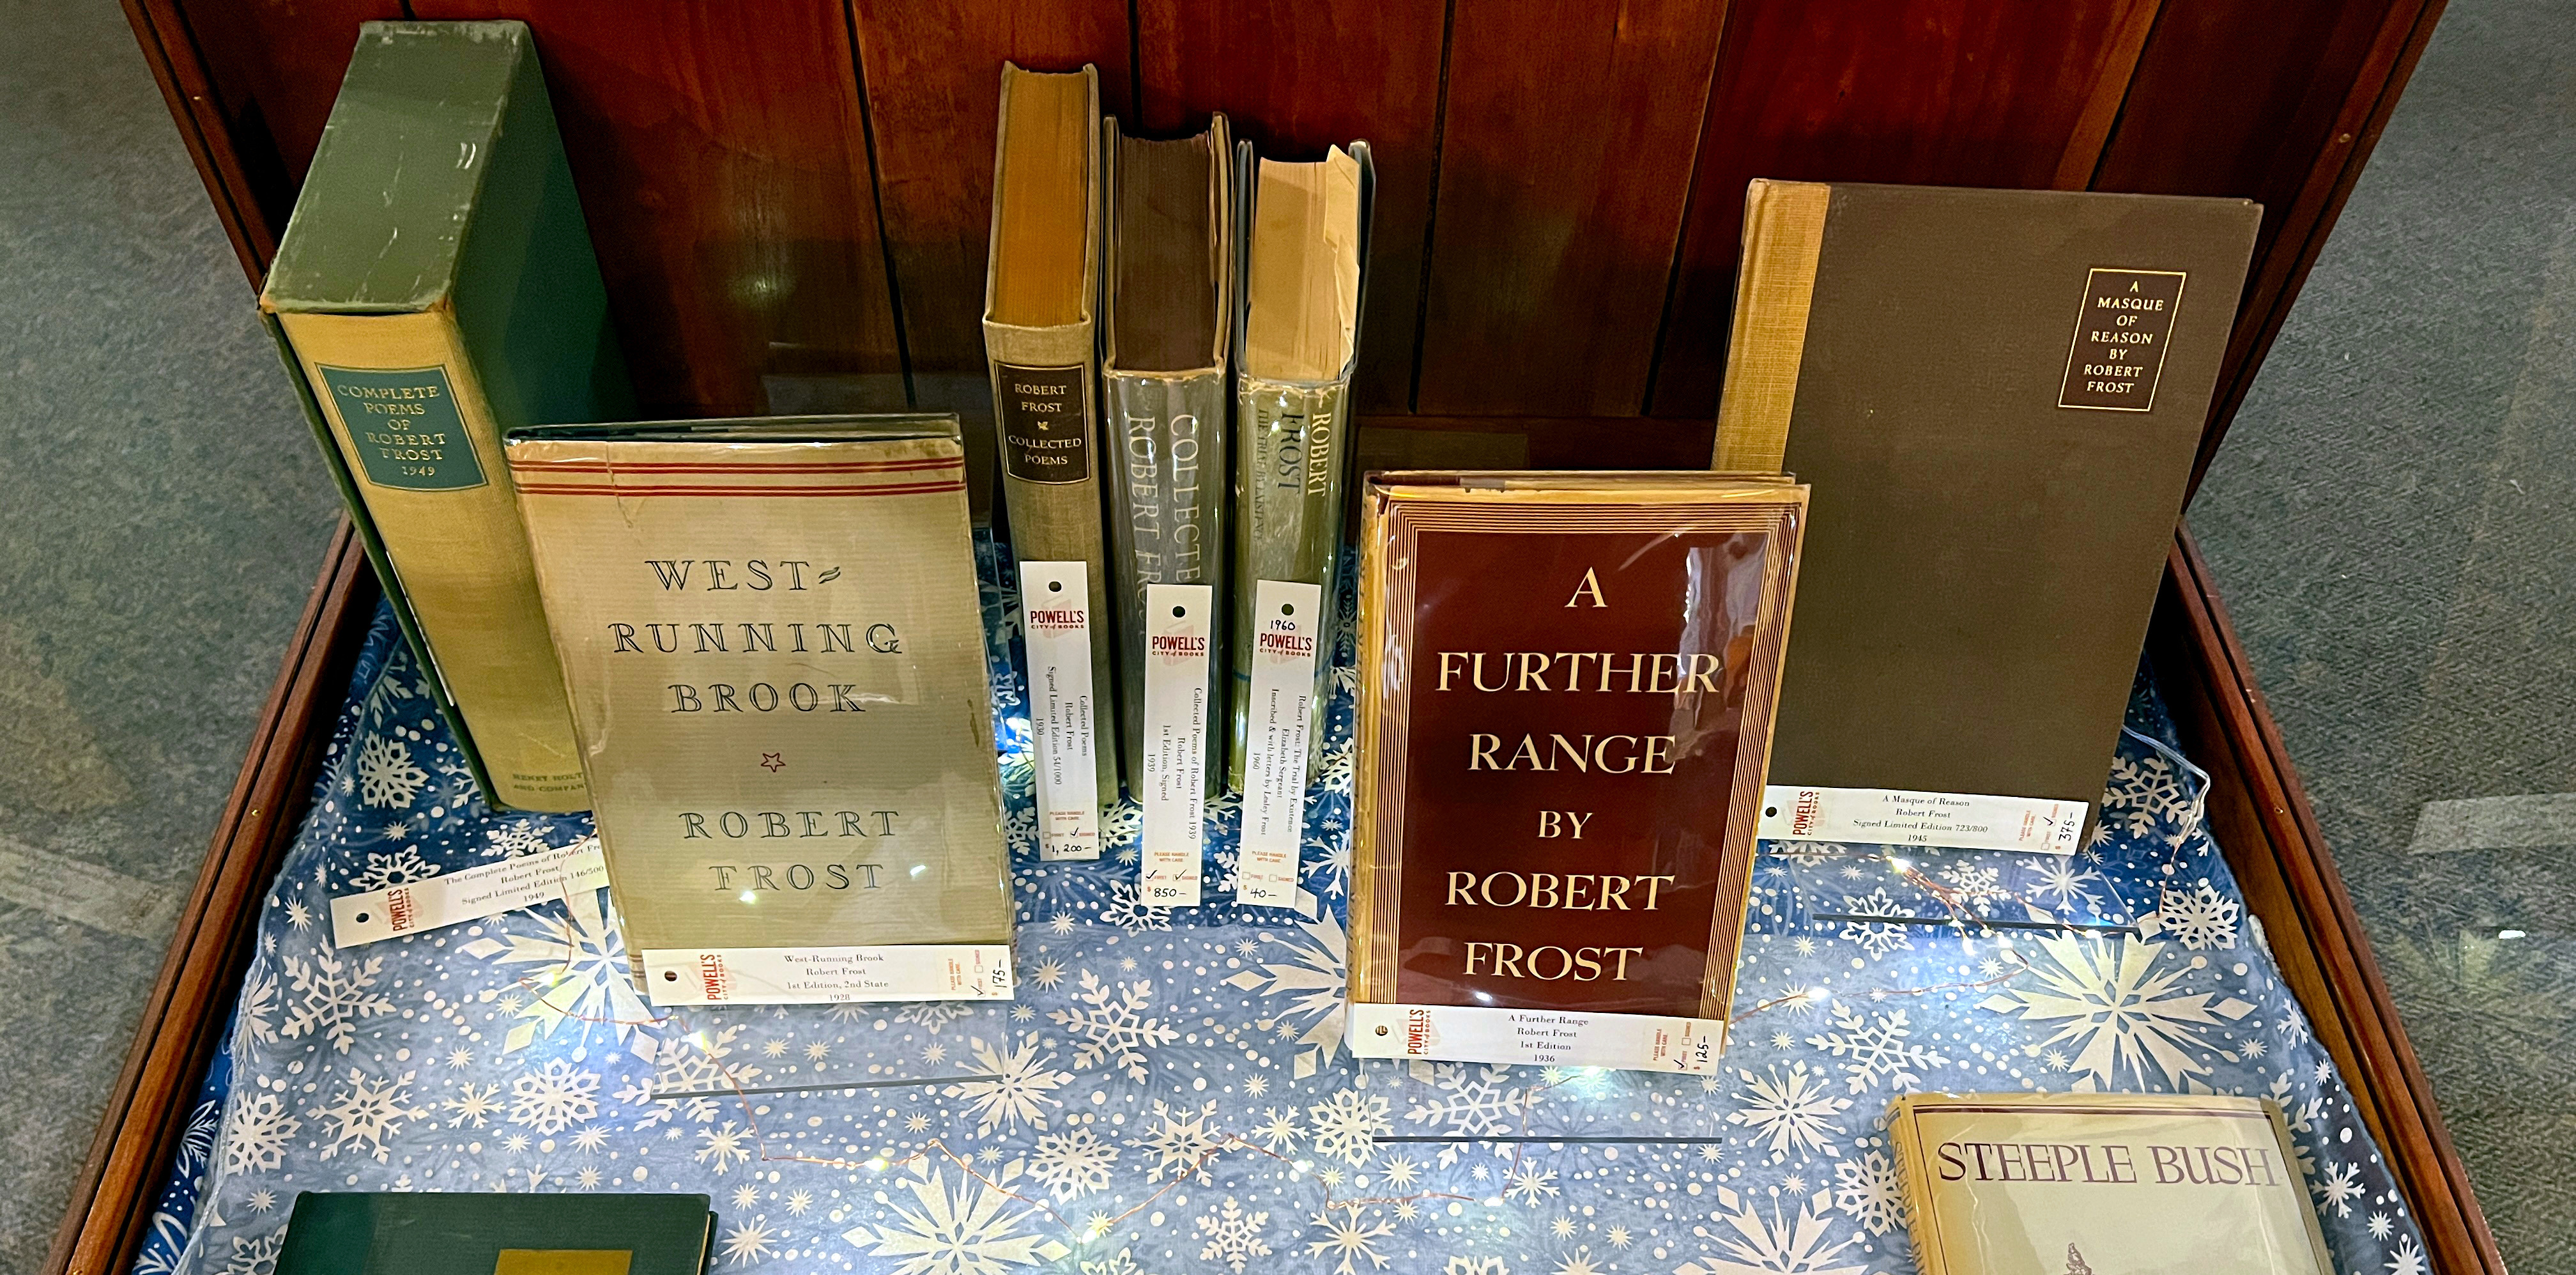 Rare Book Room Dispatch: Robert Frost Collection